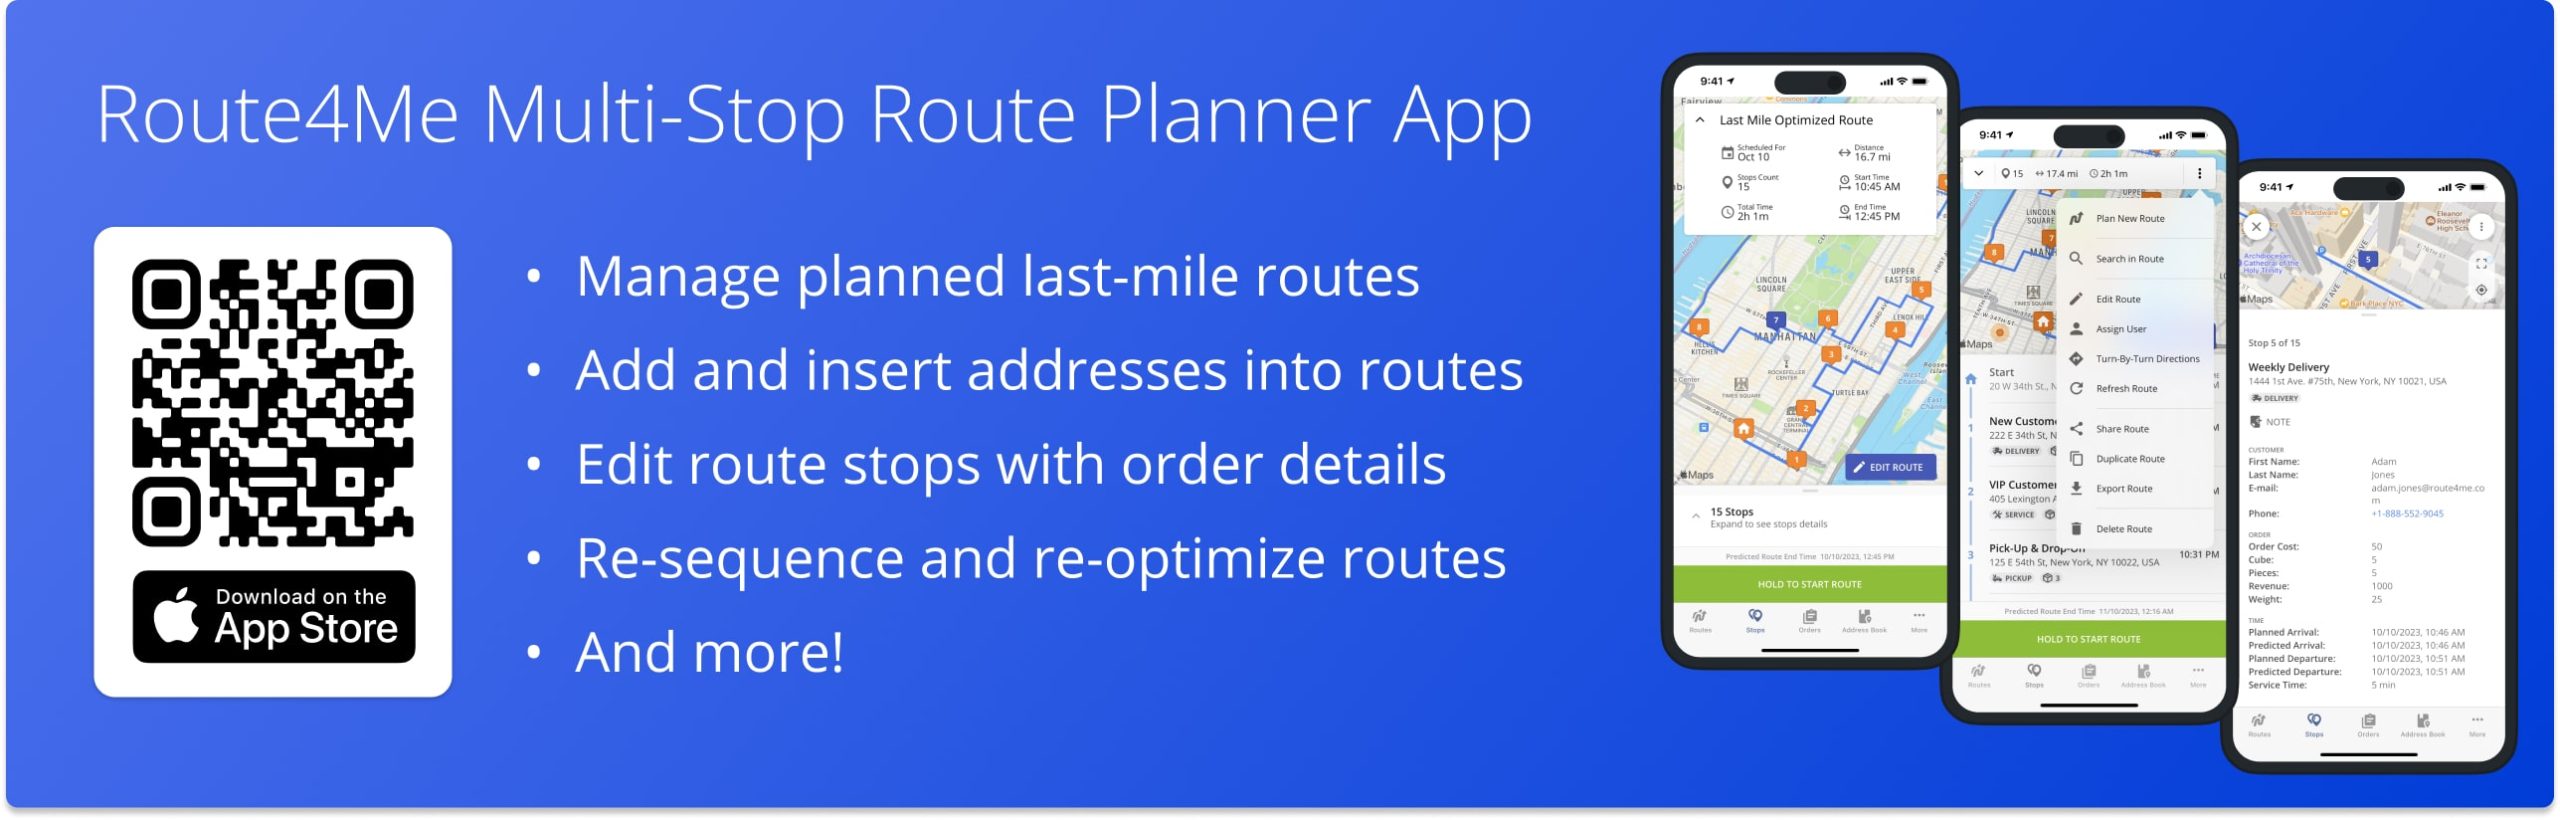 Using last mile route management on Route4Me's iPhone Route Planner app to add addresses into routes, re-optimize routes, and more.